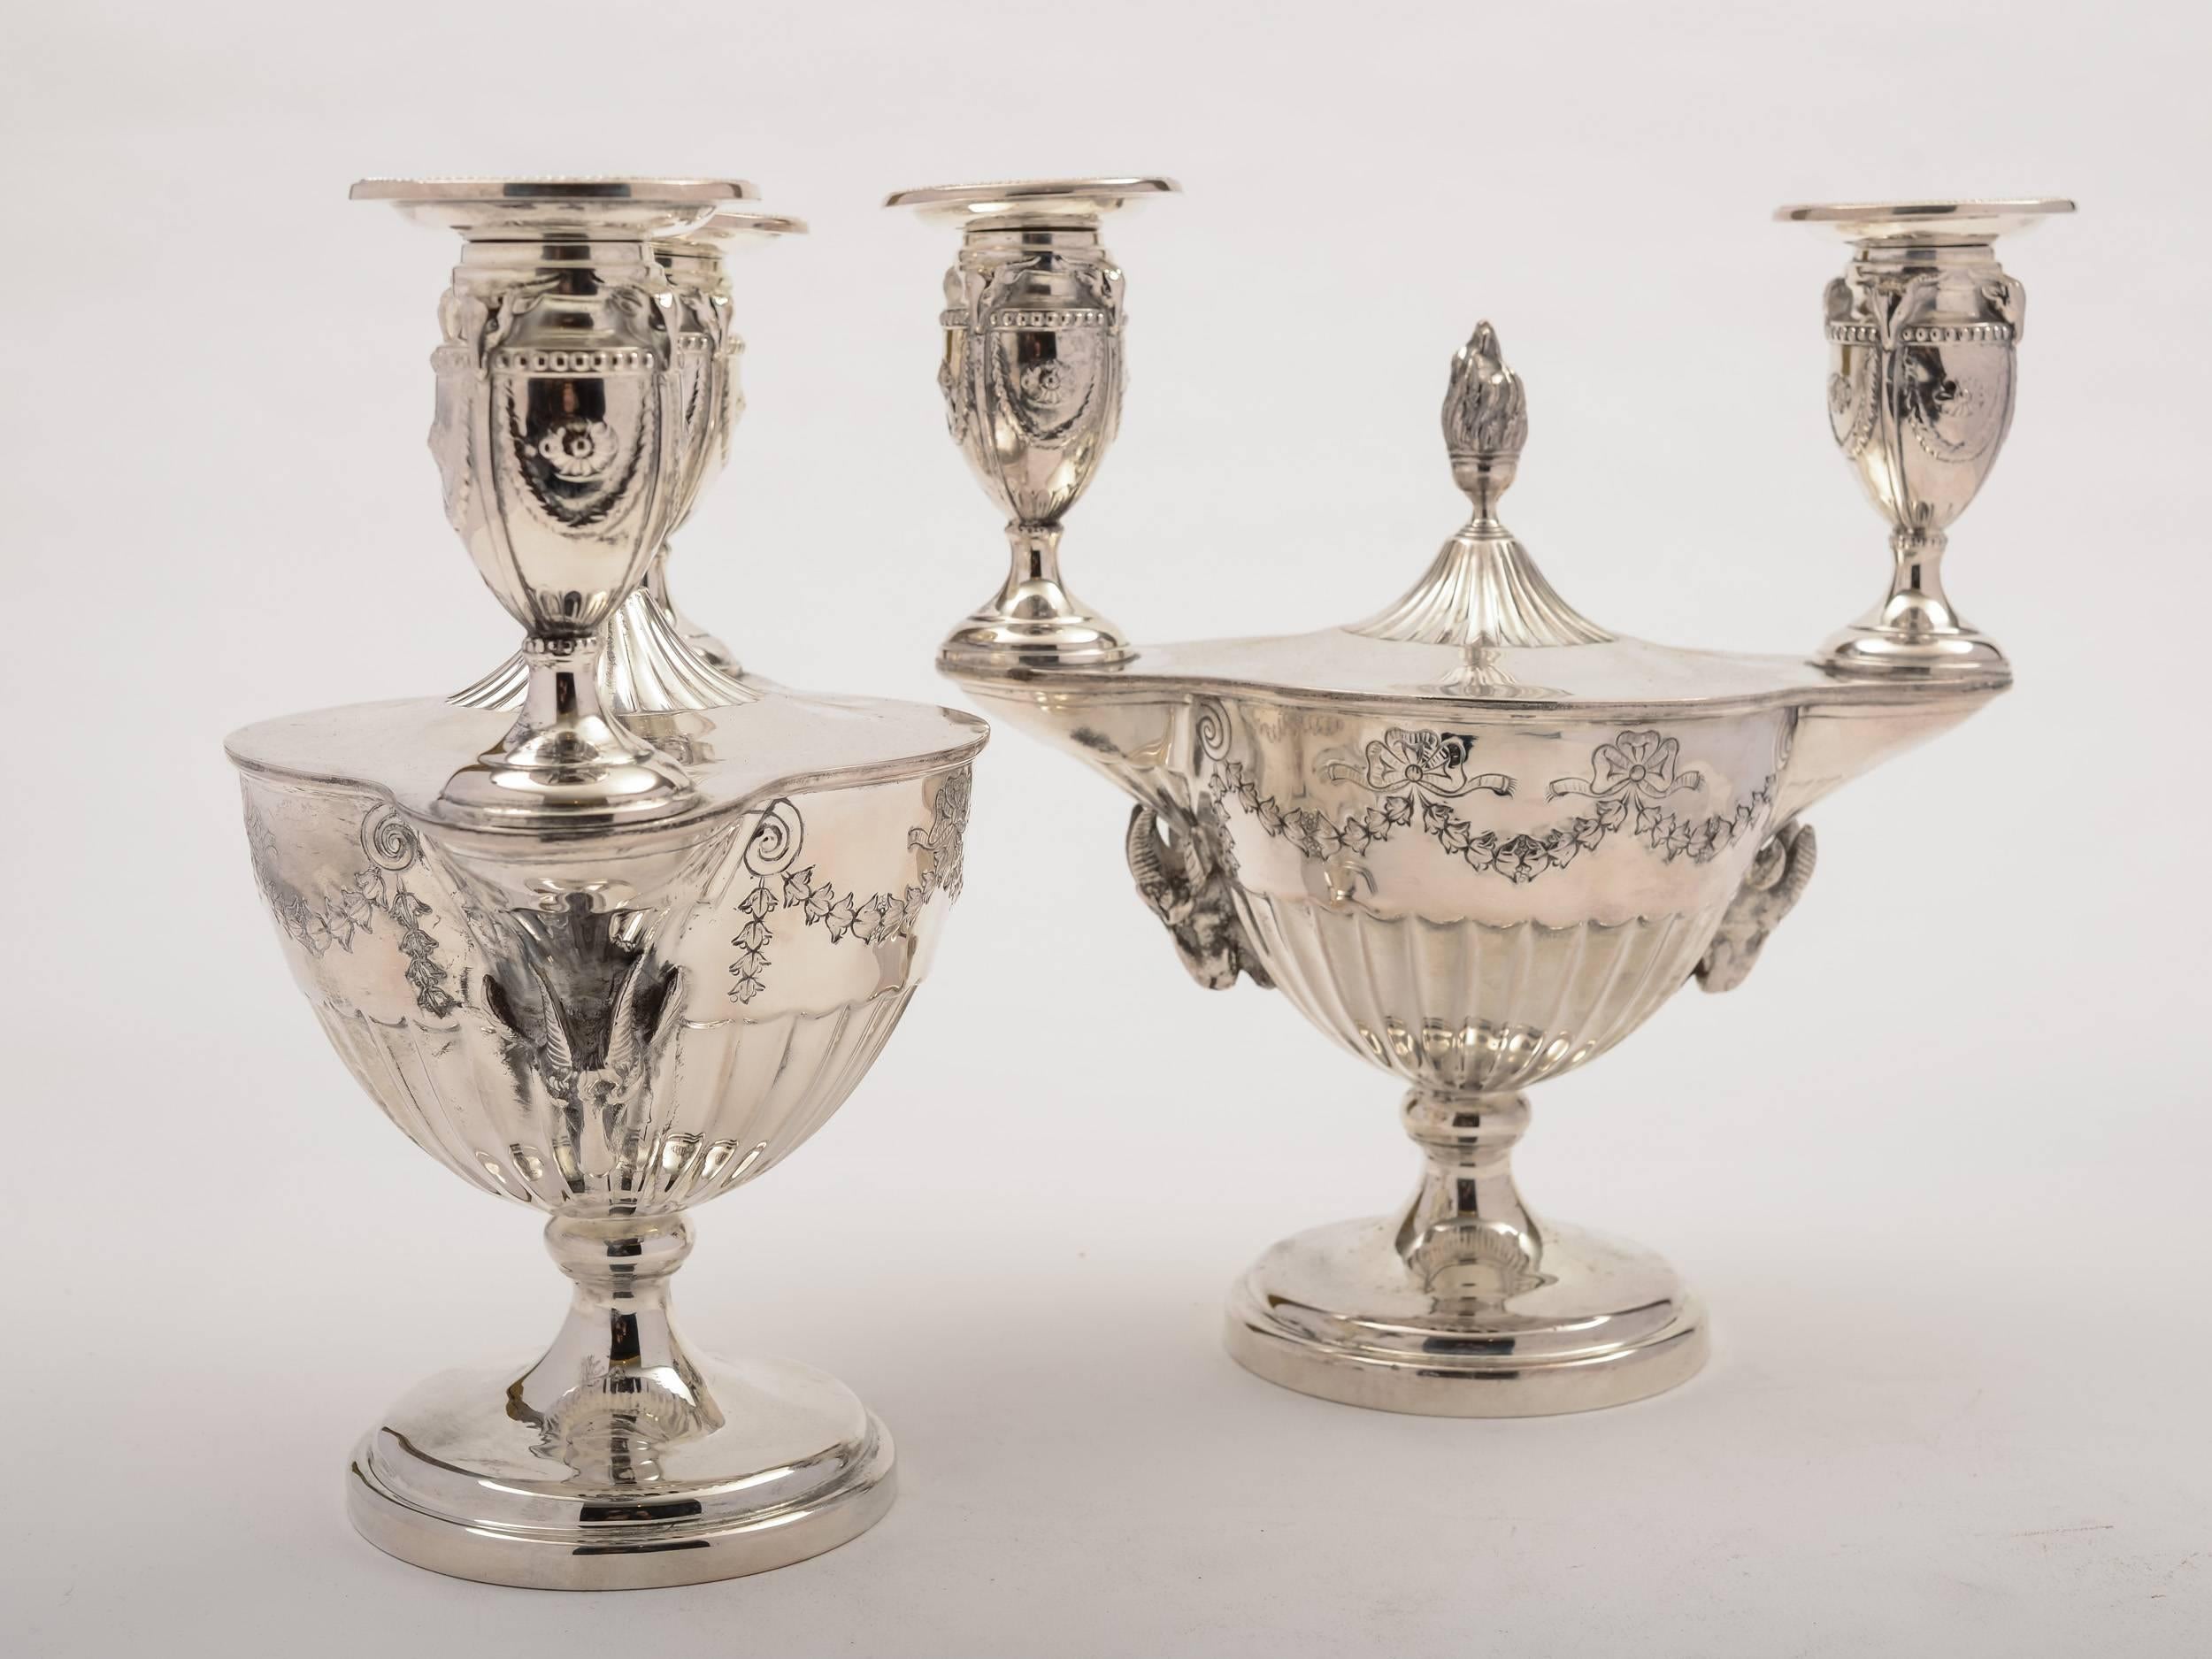 A stunning pair of English Victorian silver plated Adam style candelabras. Have rams head and embossed swag decoration, circa 1890 and made by the renowned maker, Mappin & Webb. This is the first pair we have had in this style for quite a long